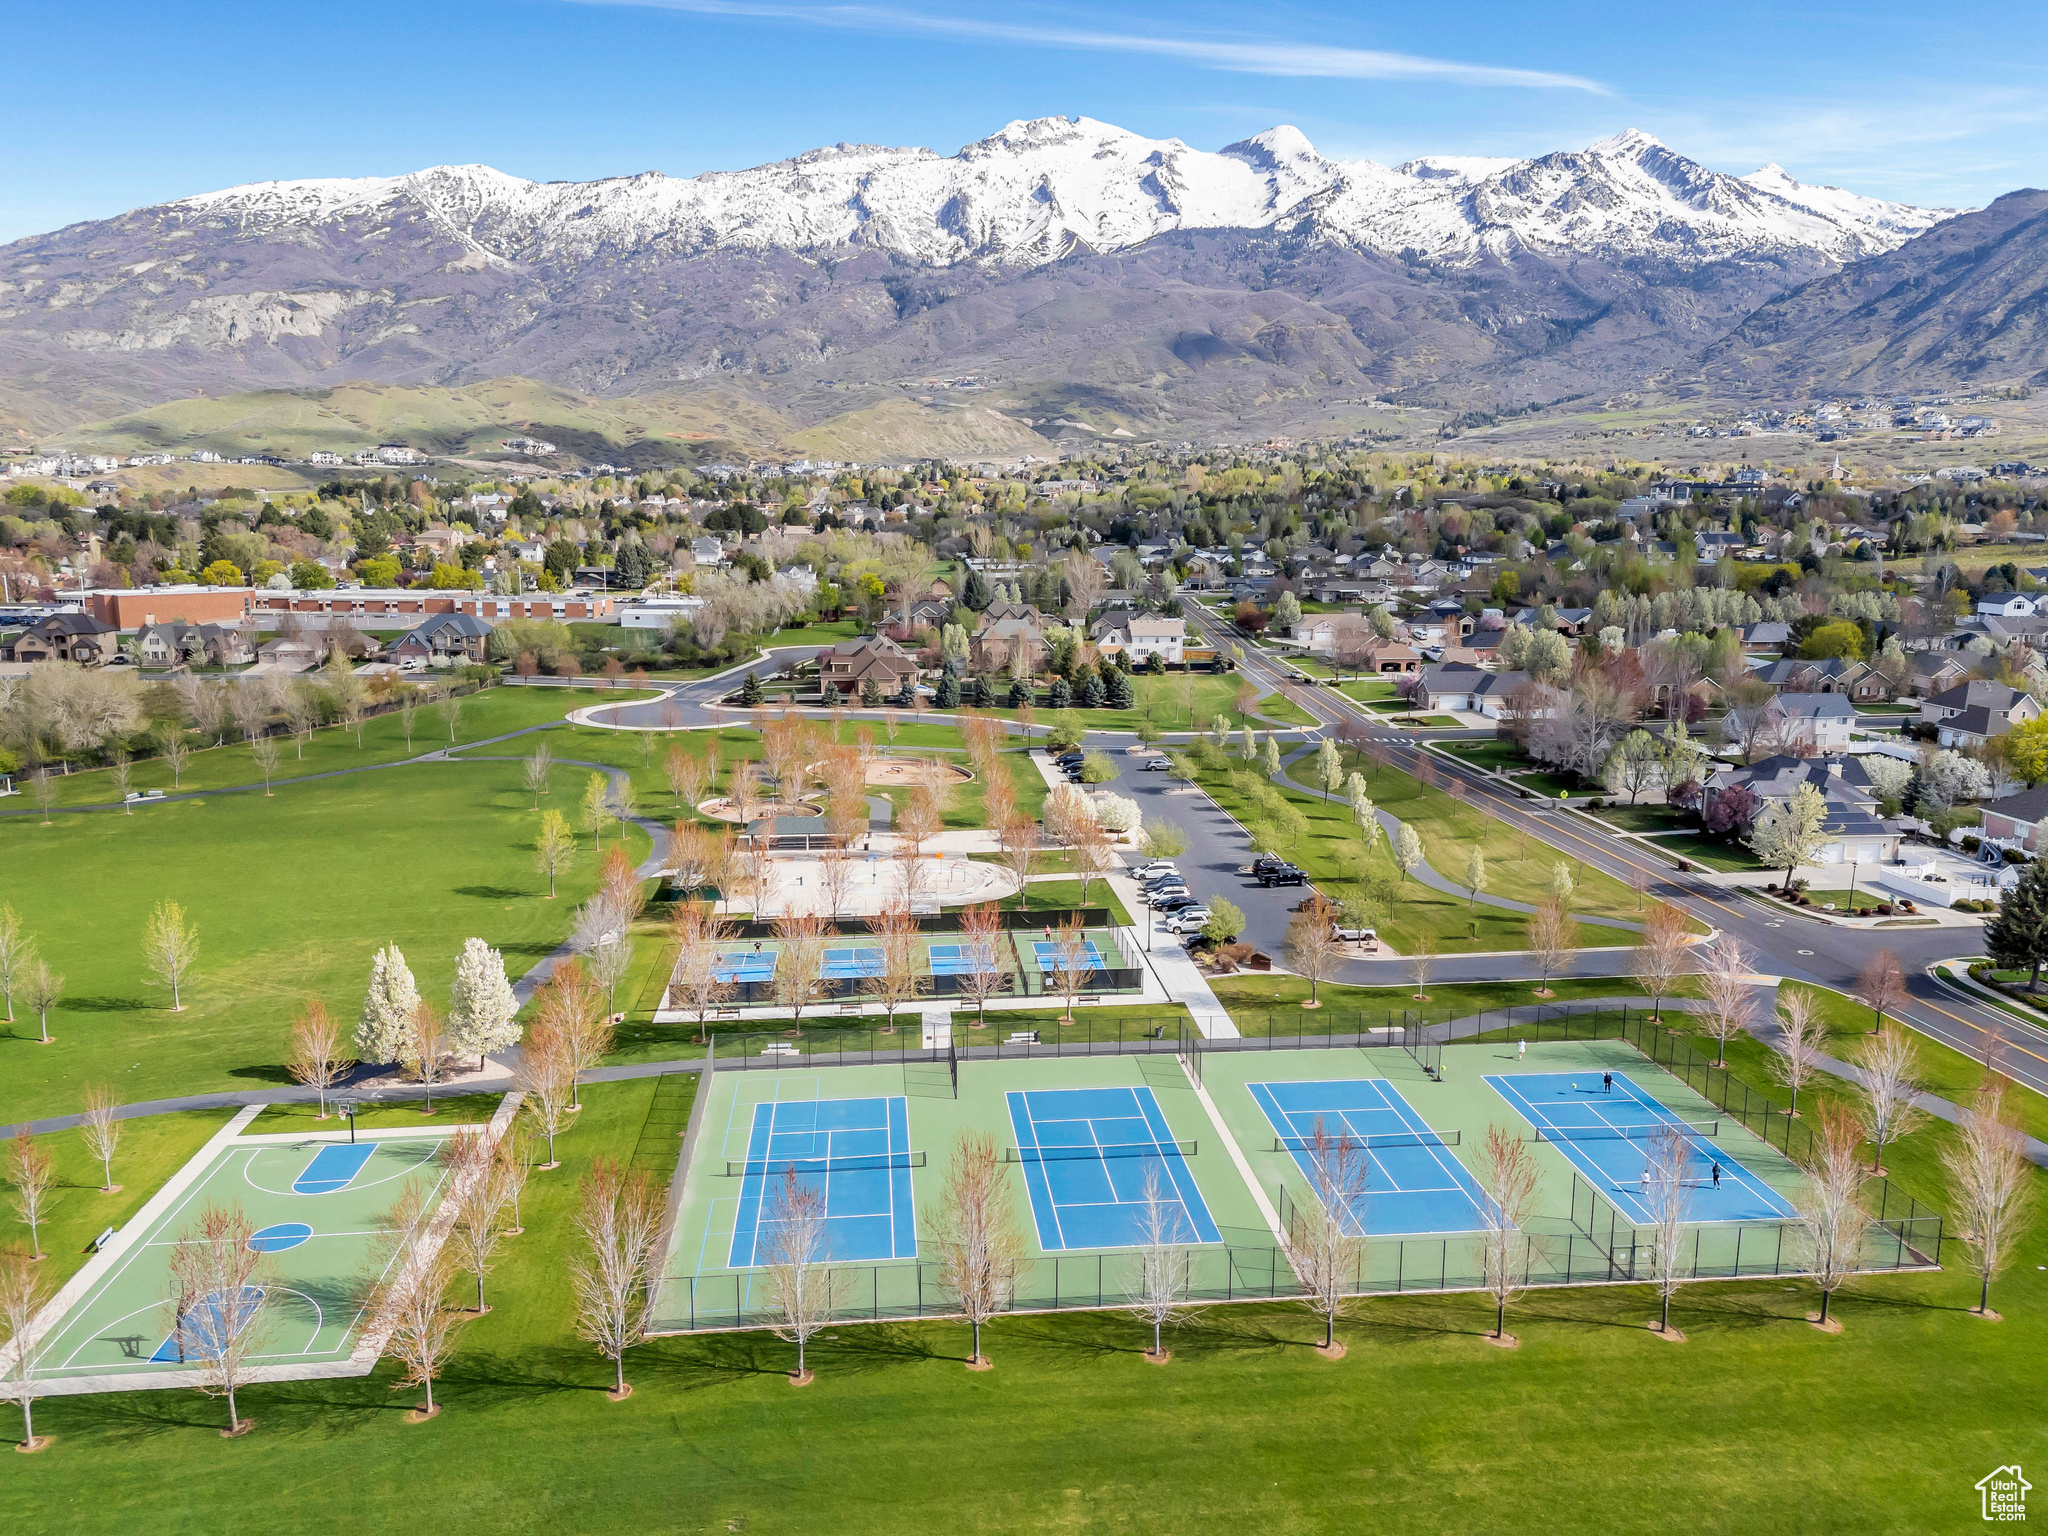 Creekside Park - Tennis & Pickle Ball Courts